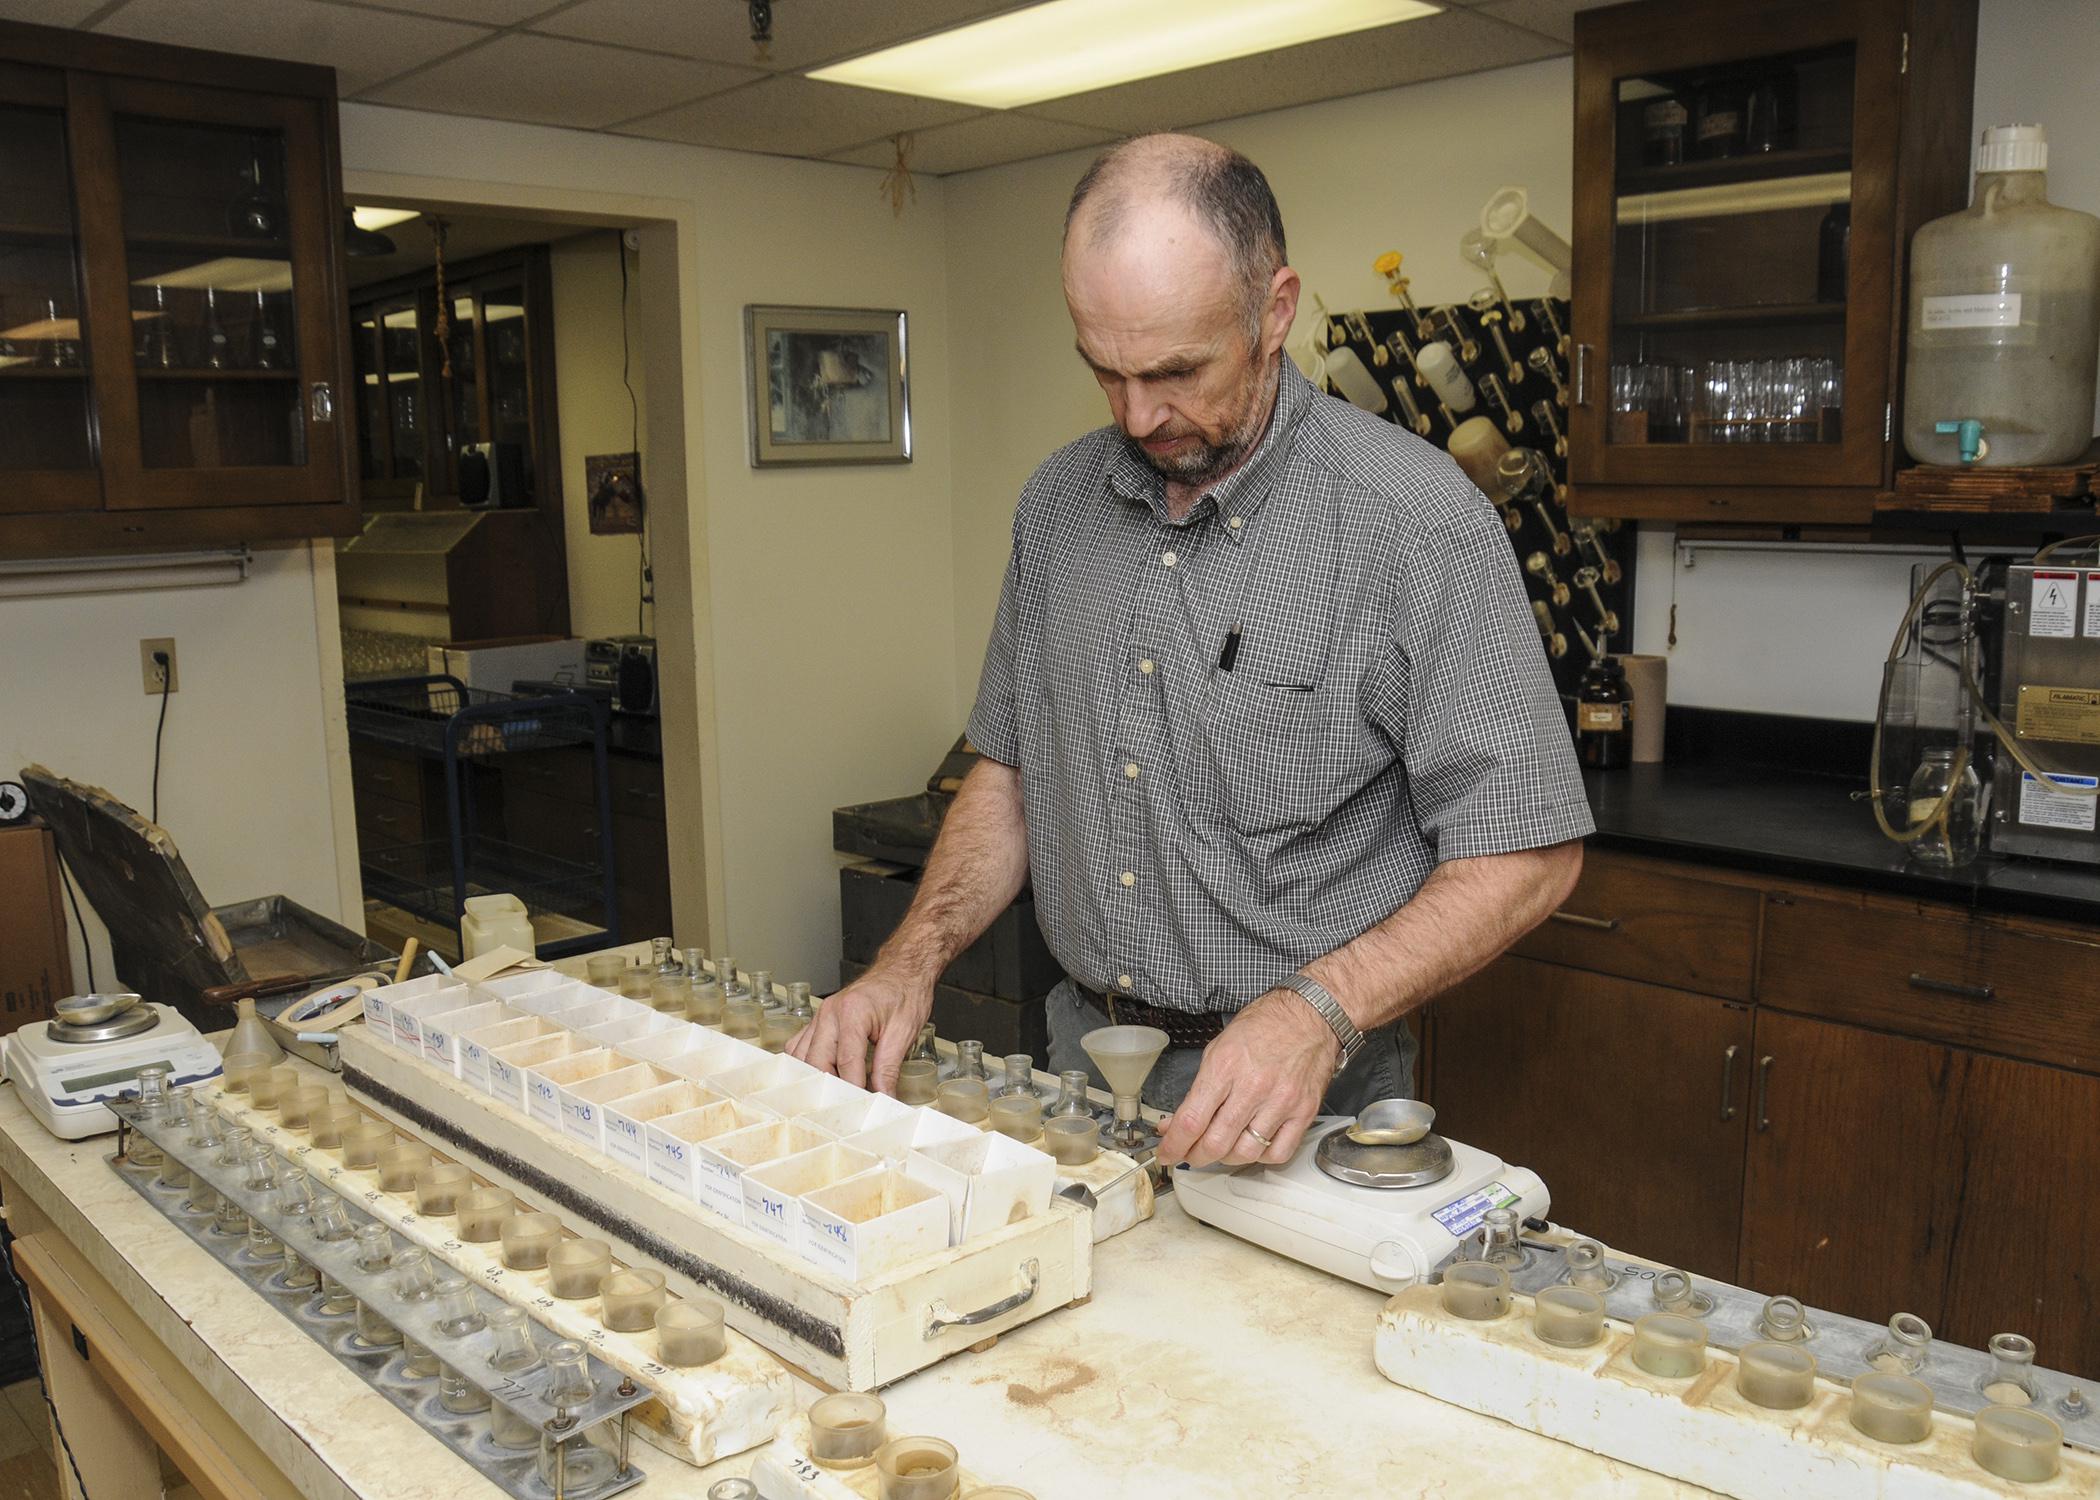 Mississippi State University Extension Service agronomy specialist Keith Crouse sorts through routine samples on April 10, 2013, in the MSU Soil Testing and Plant Analysis Lab, where every day is Earth Day, not just April 22. (Photo by MSU Ag Communications/Scott Corey)